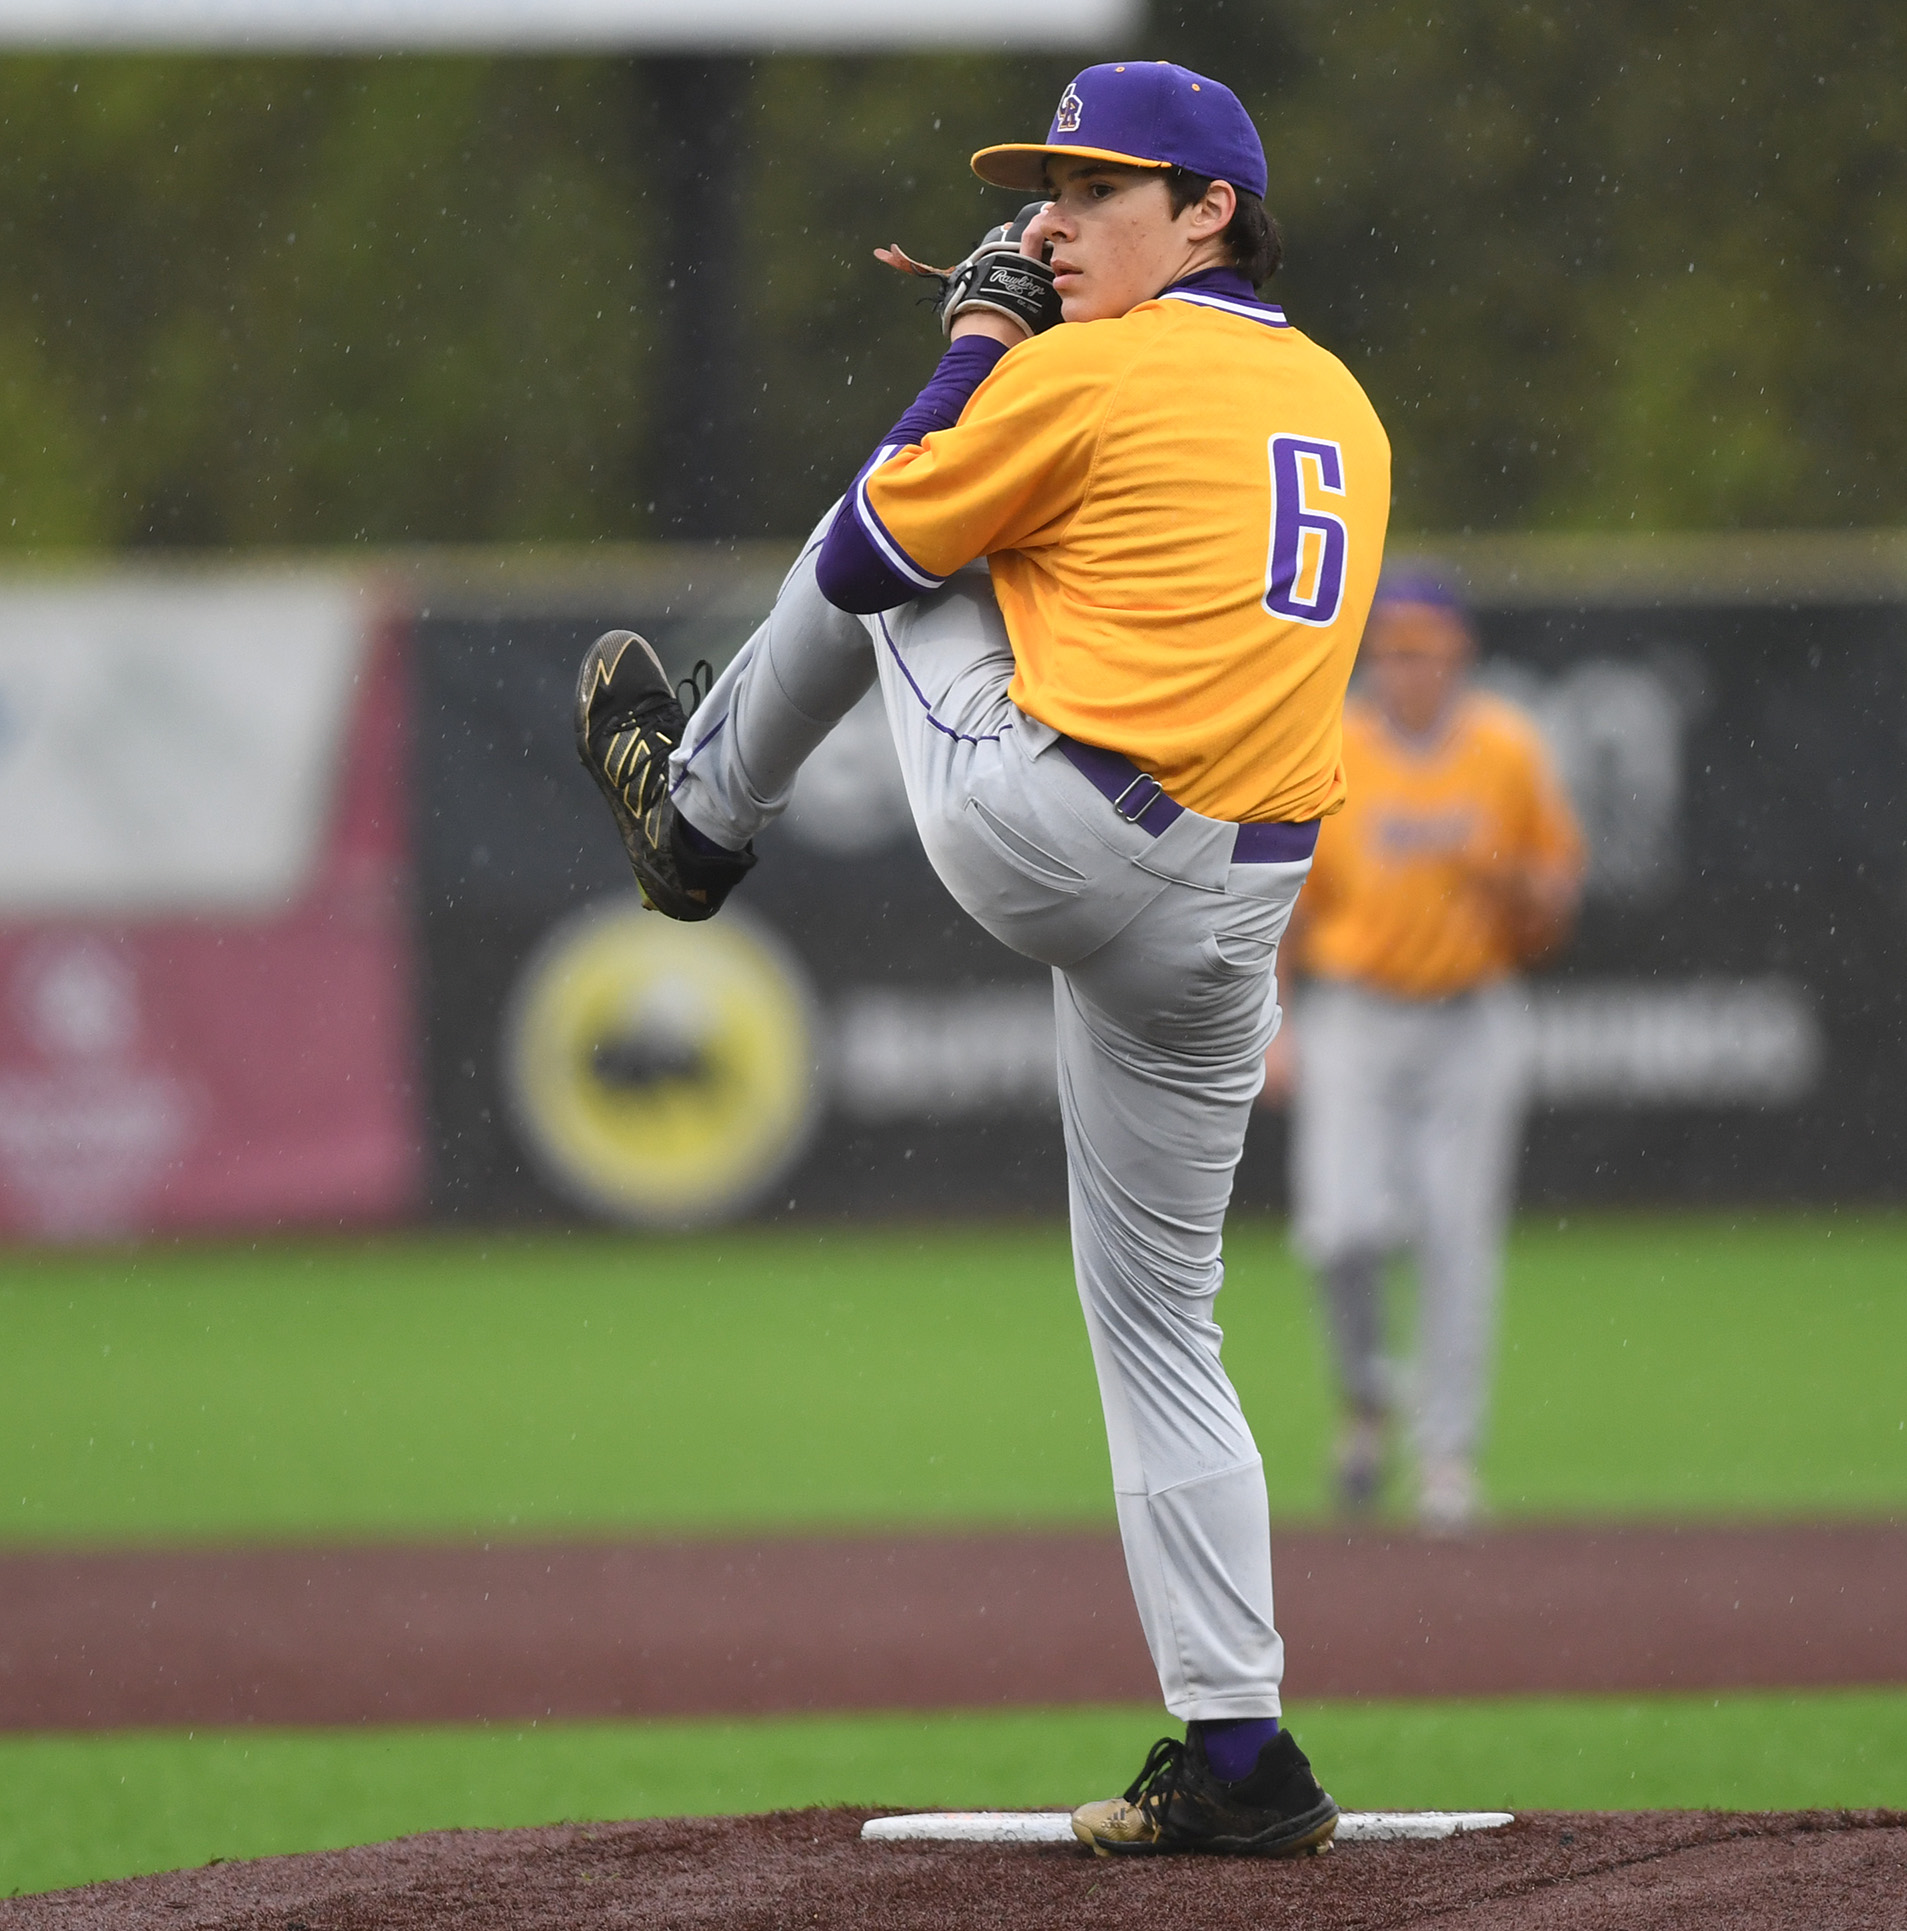 Columbia River's Zach Ziebell winds up Friday, May 13, 2022, during River’s 5-2 win against Tumwater in the 2A District Championship at Ridgefield Outdoor Recreation Center.